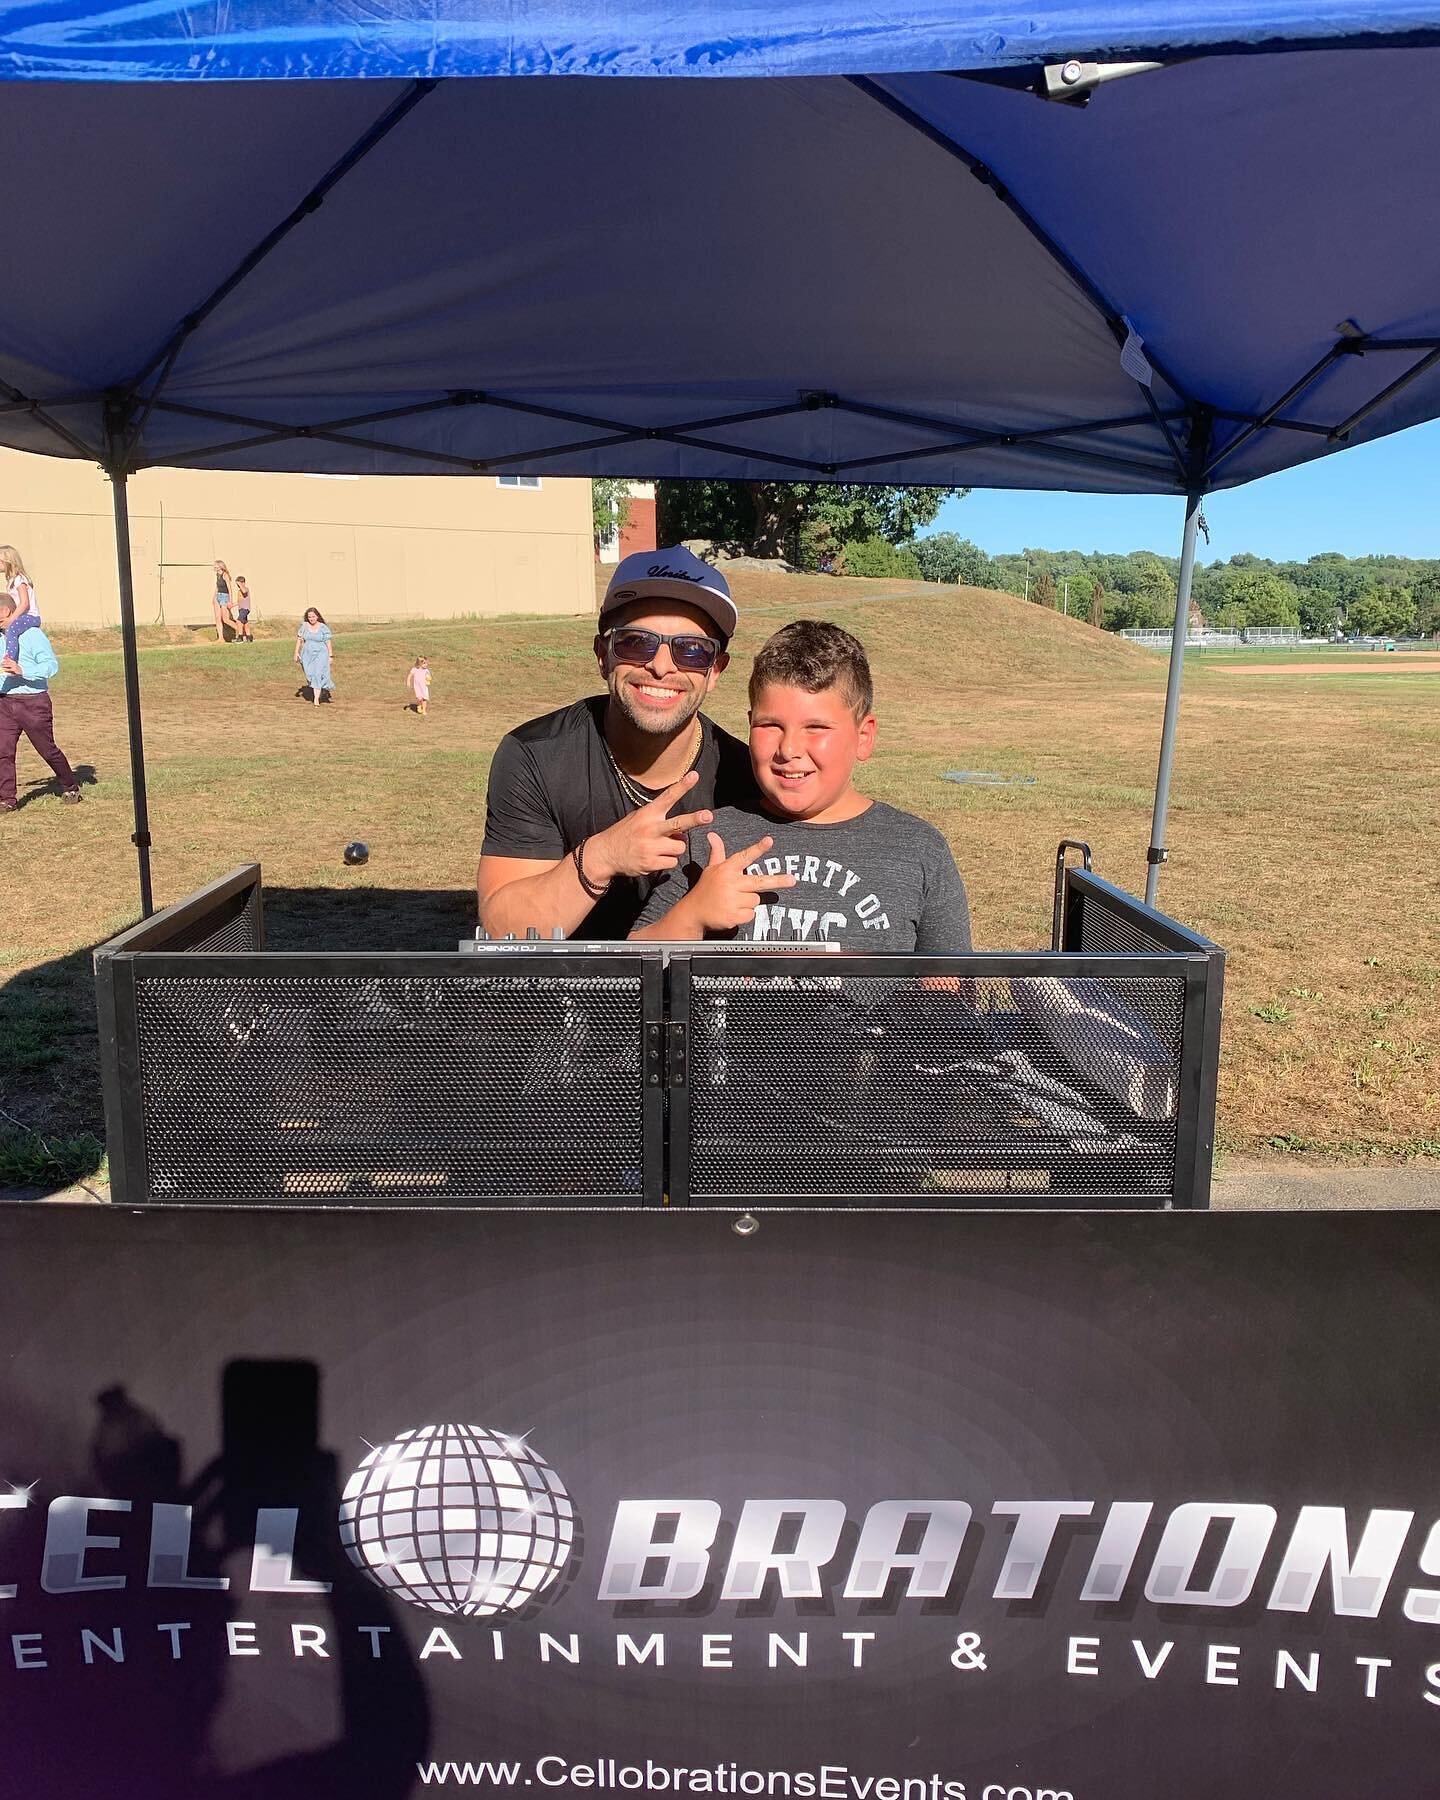 They say start em young! My Dj protege - NOAH. @cellobrationsevents 
I&rsquo;ve mentored a lot of kids but this one keeps me on my toes. Always ambitious and heck of a sense of humor for a kid. Love watching him grow. Keep an eye out for him at #king